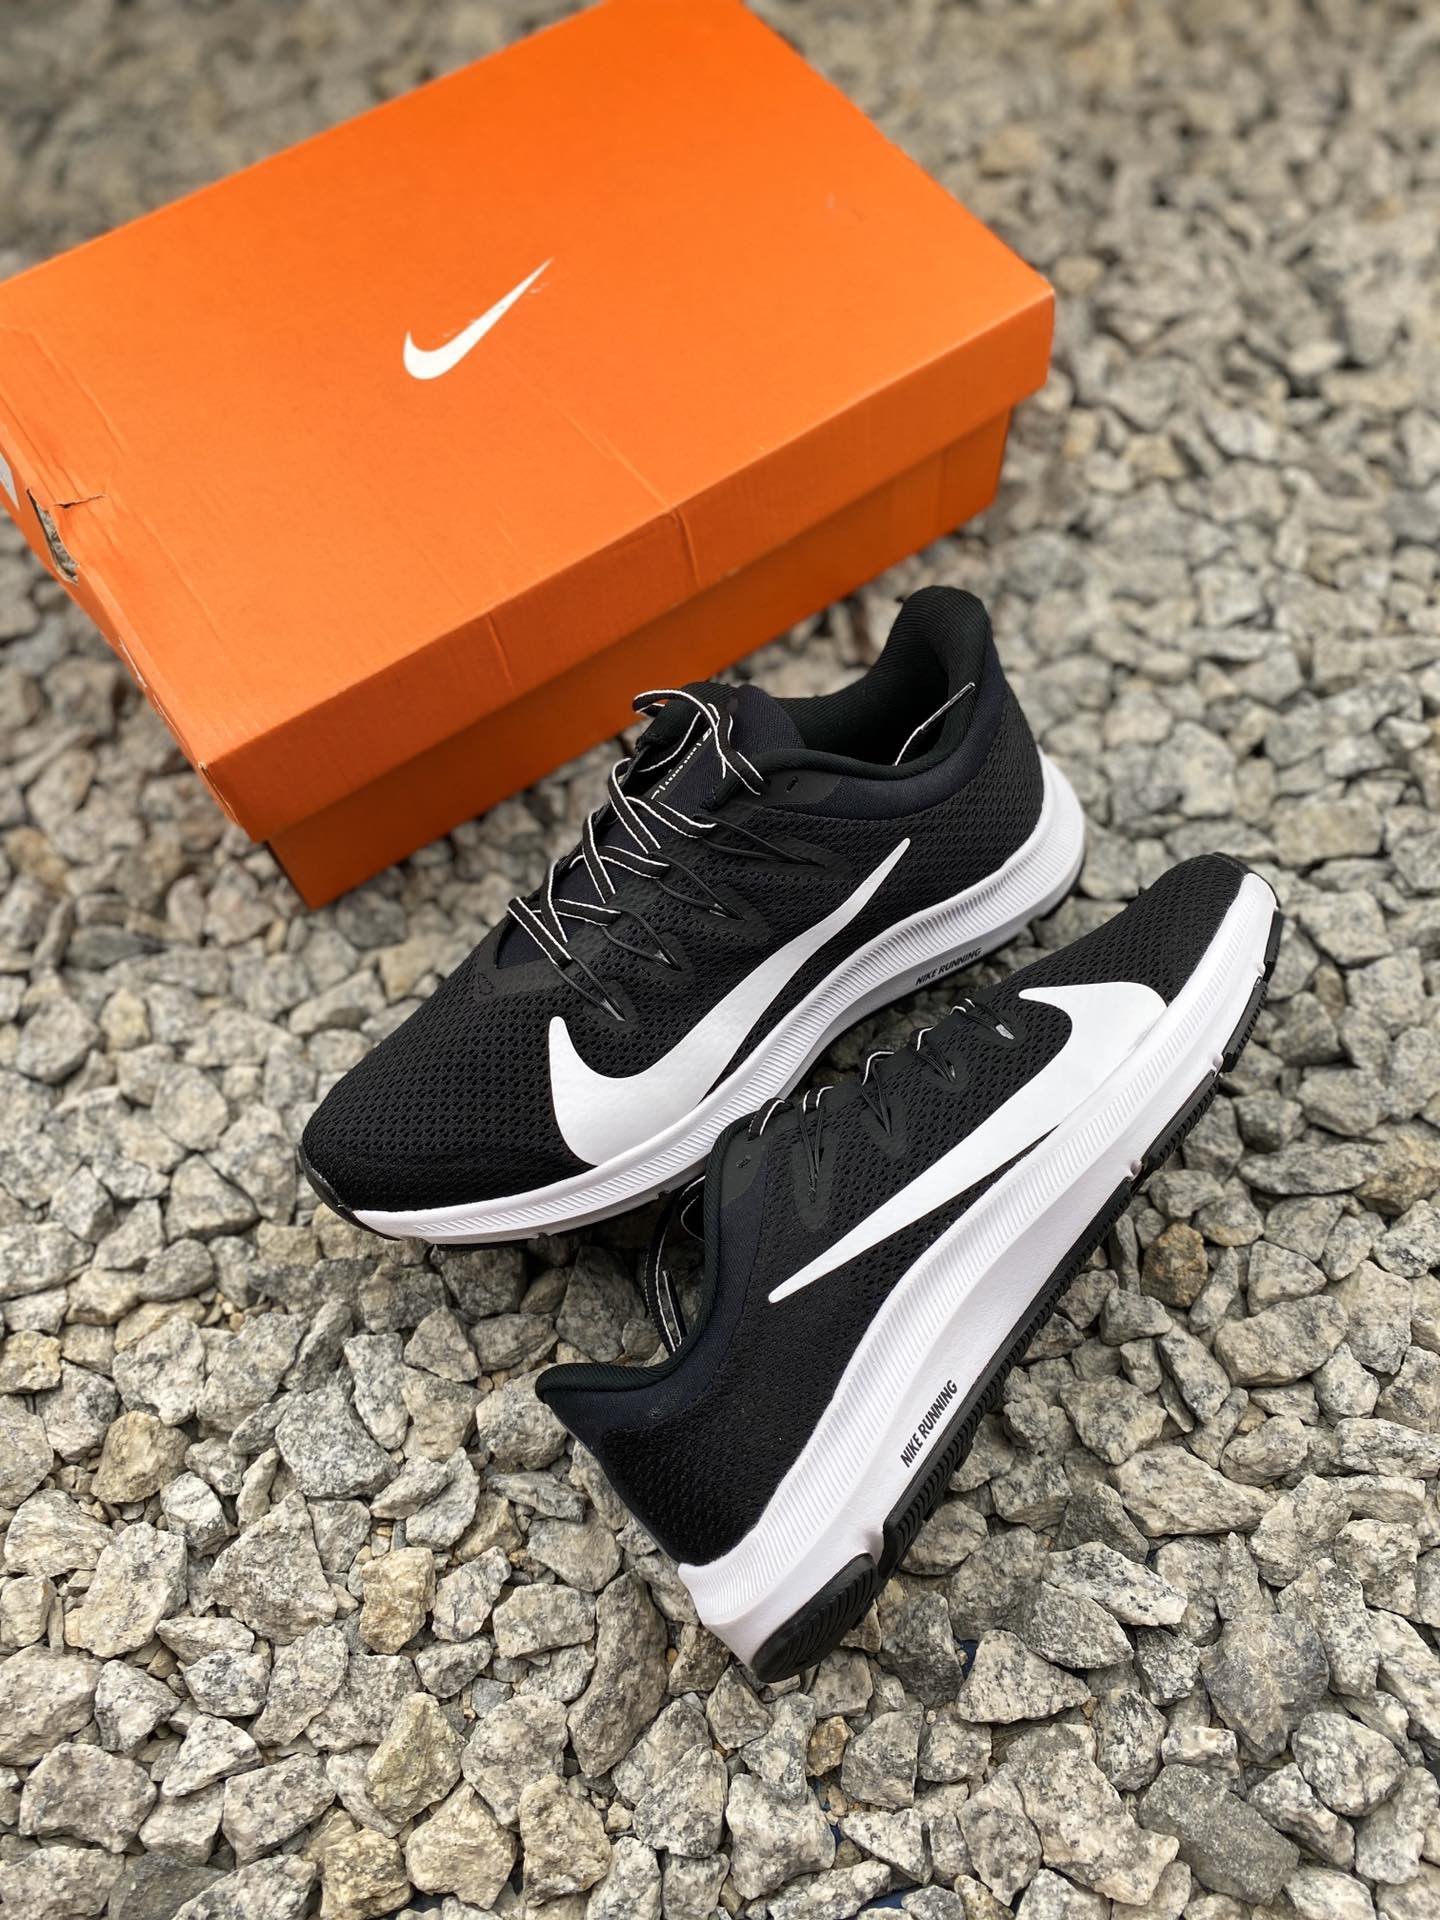 nike quest 3.0